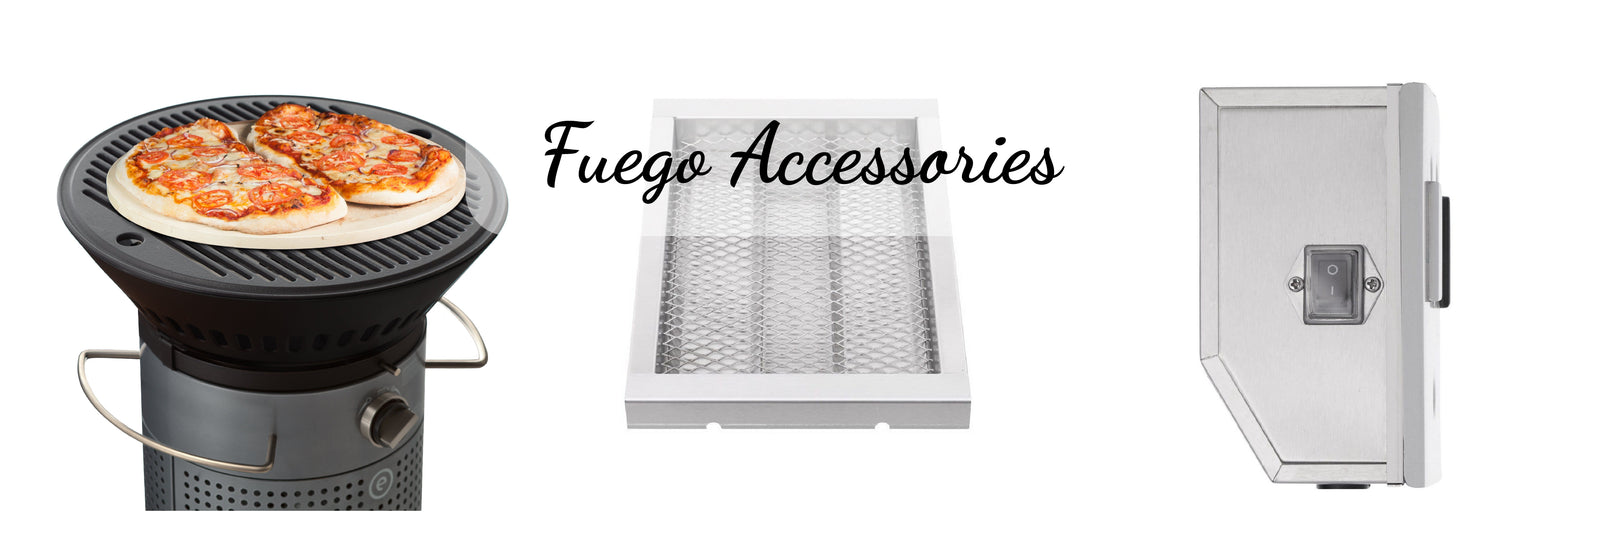 Rejse Amorous Anoi Fuego Accessories | OutdoorKitchenPro